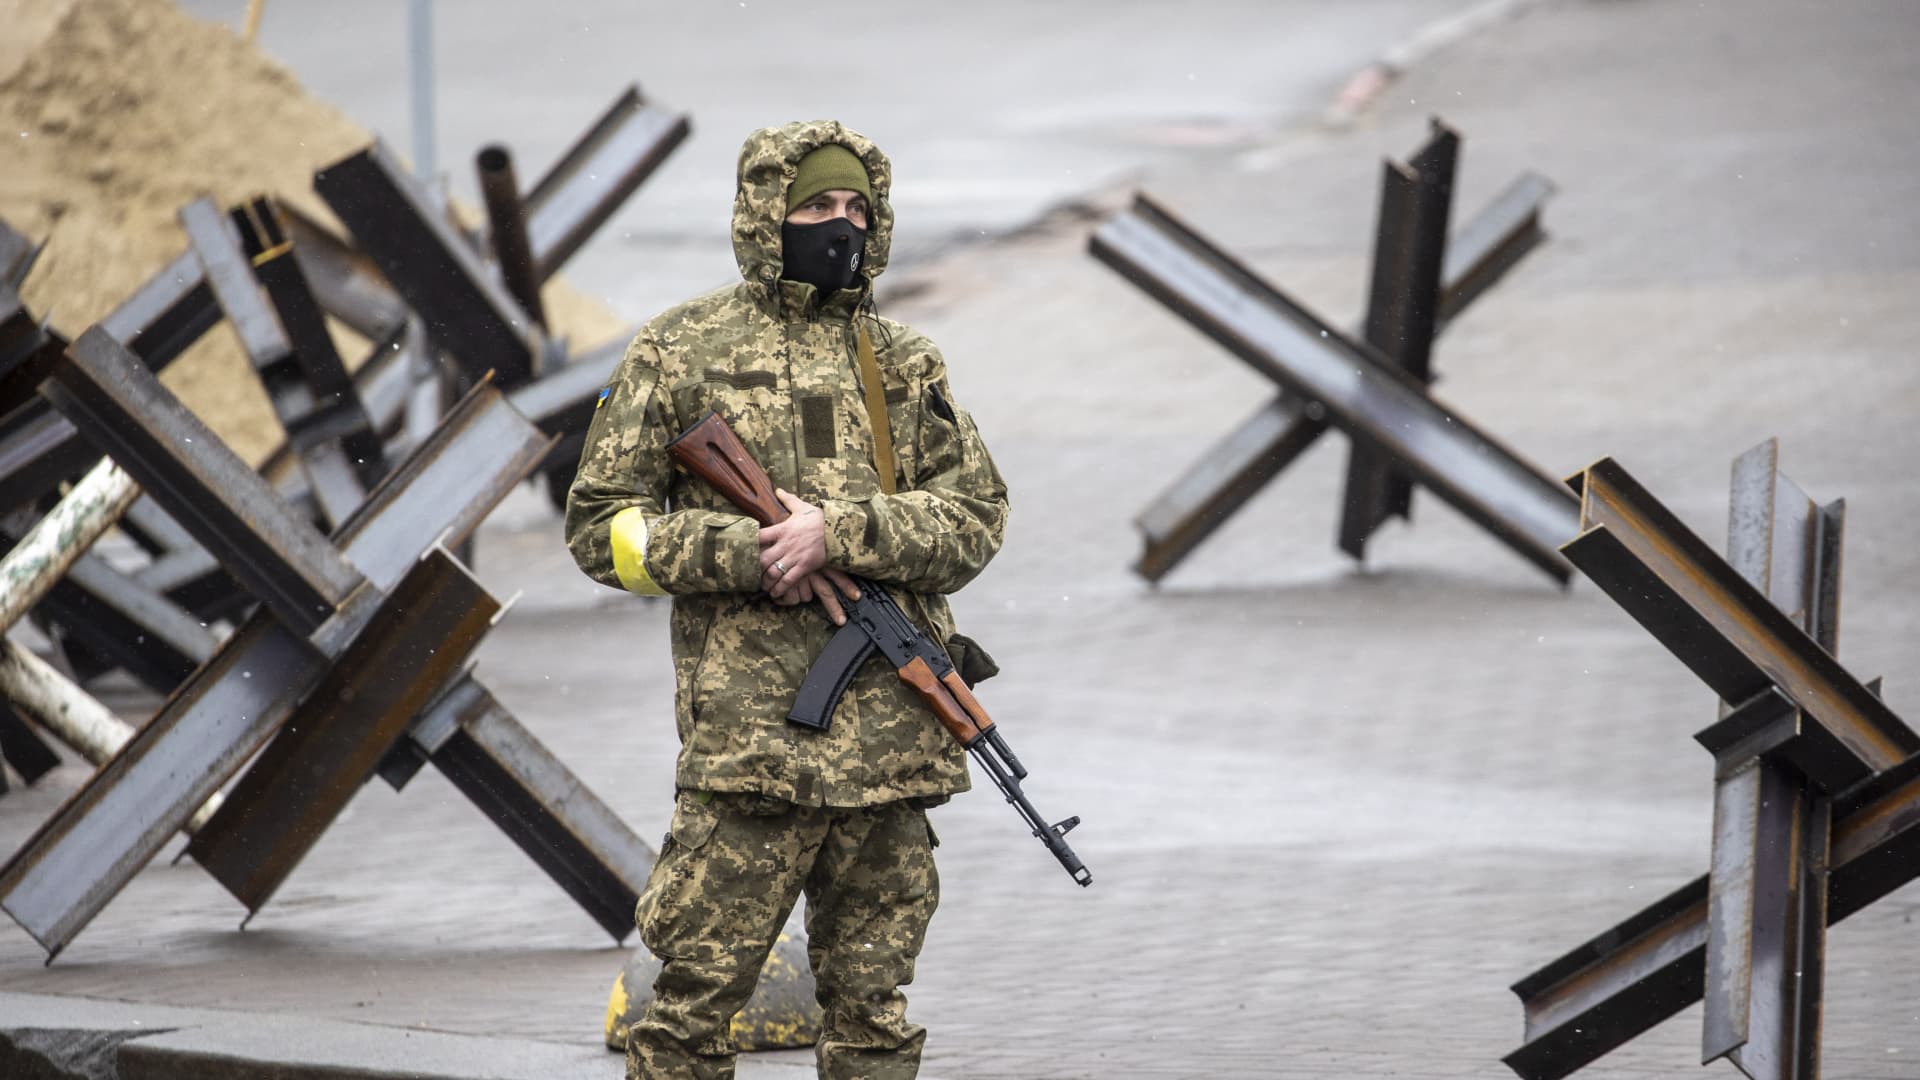 Ukrainian soldiers patrol in front of the Independence Monument during Russian attacks in Kyiv, Ukraine on March 03, 2022.